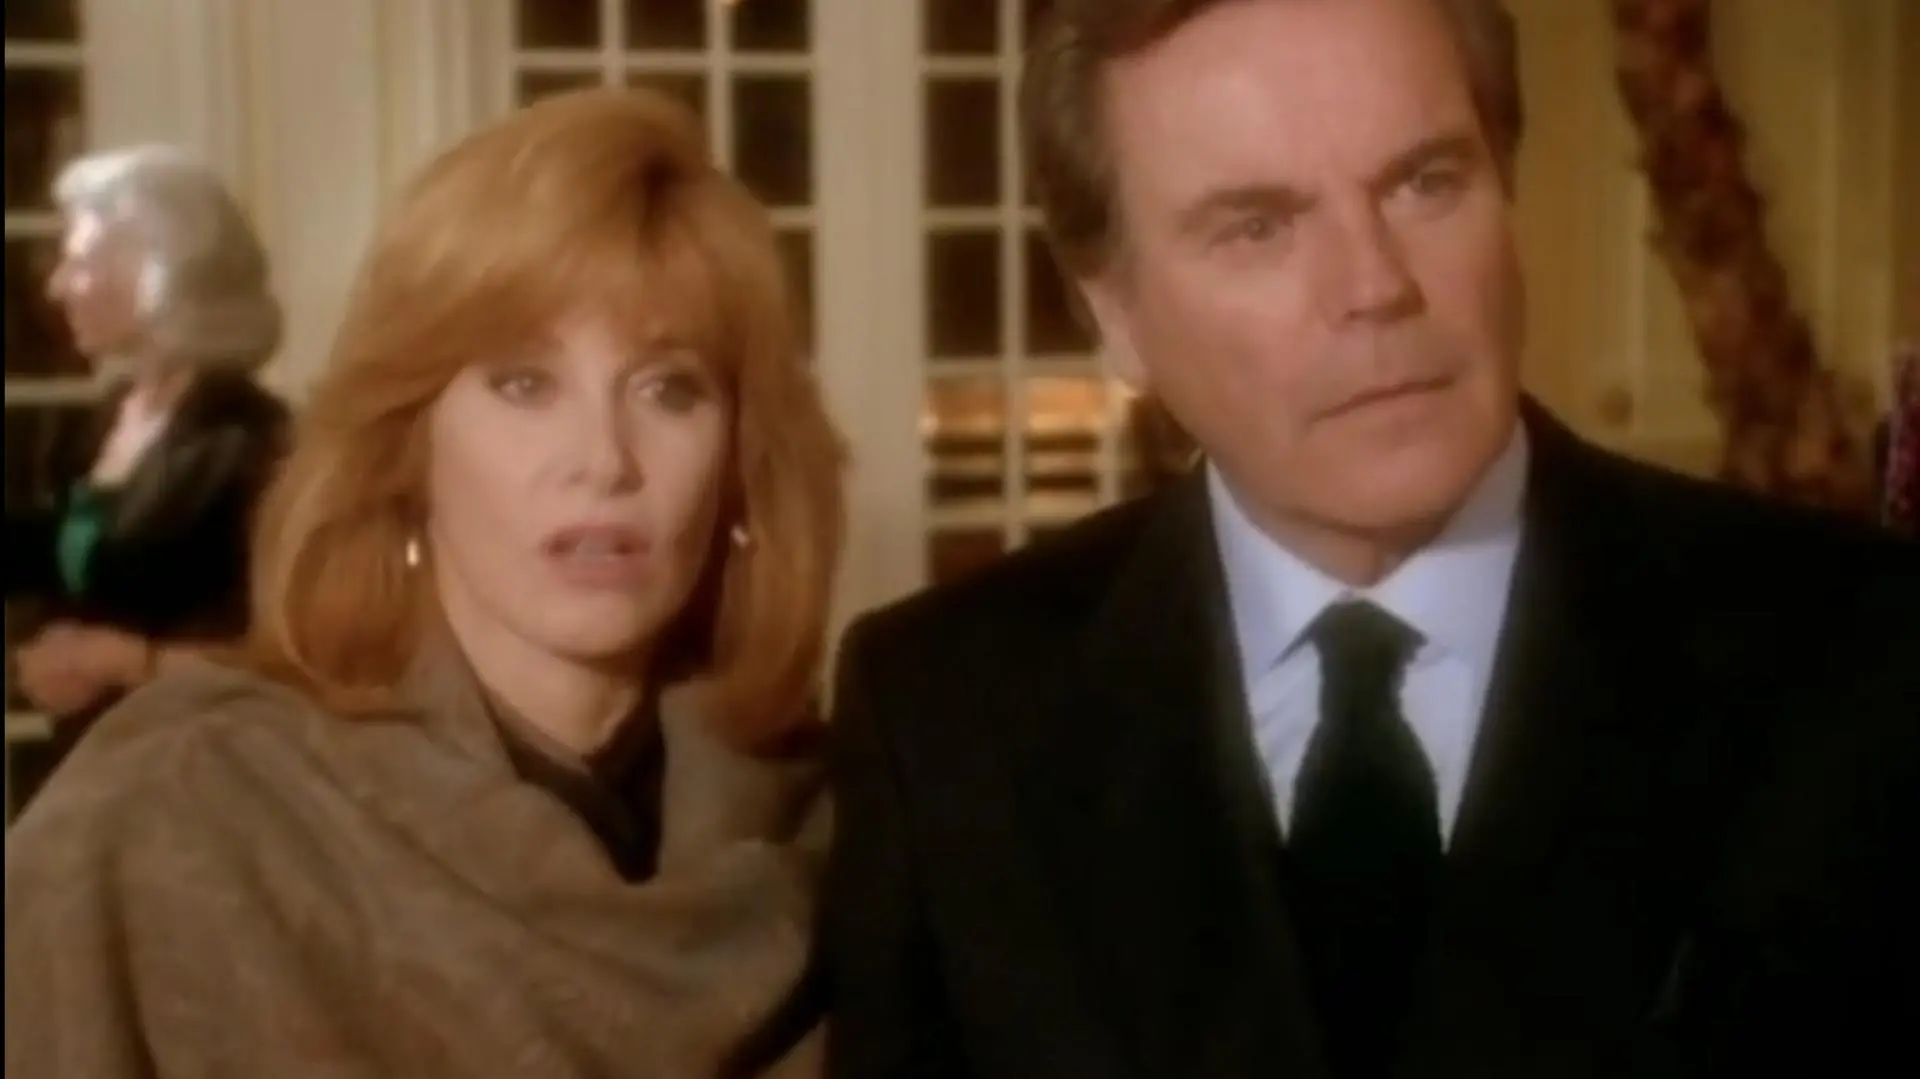 Hart to Hart: Two Harts in 3/4 Time_peliplat